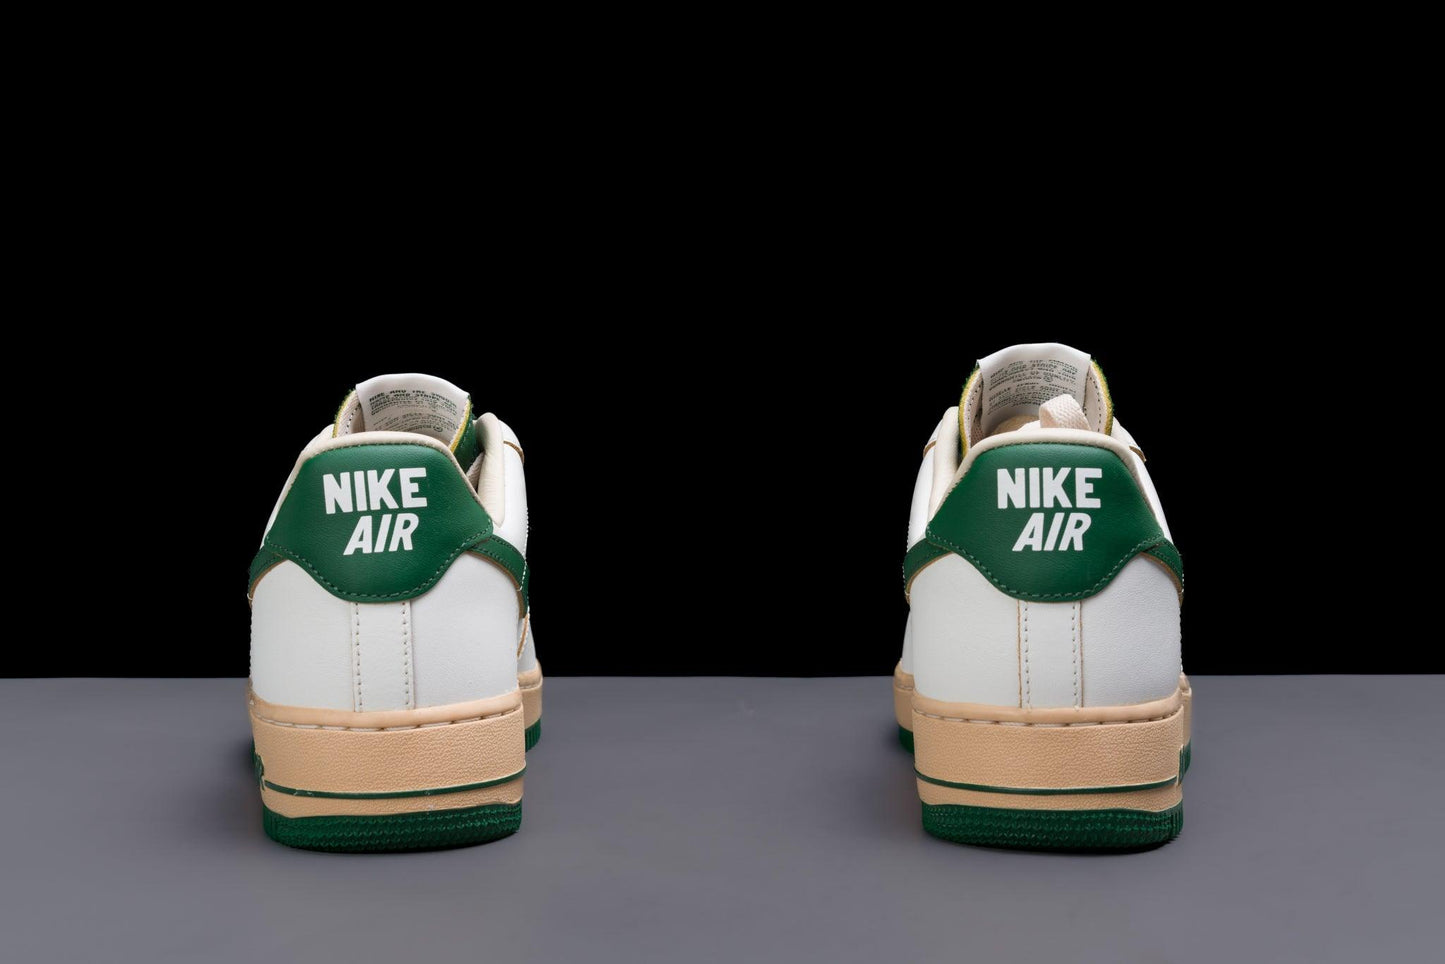 nike made air force 1 low vintage gorge green lo10m 4 1445x